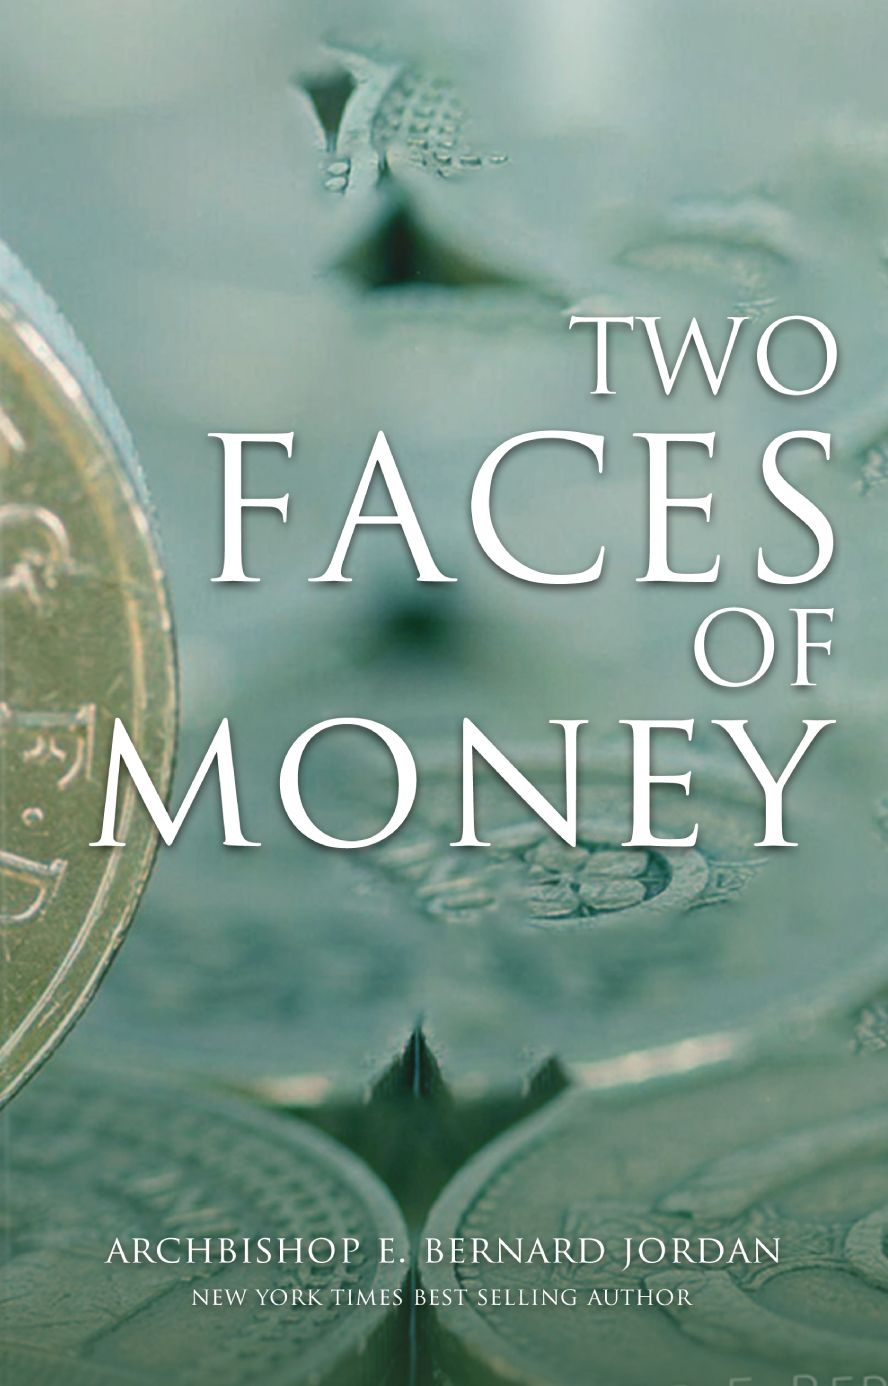 TWO FACES OF MONEY